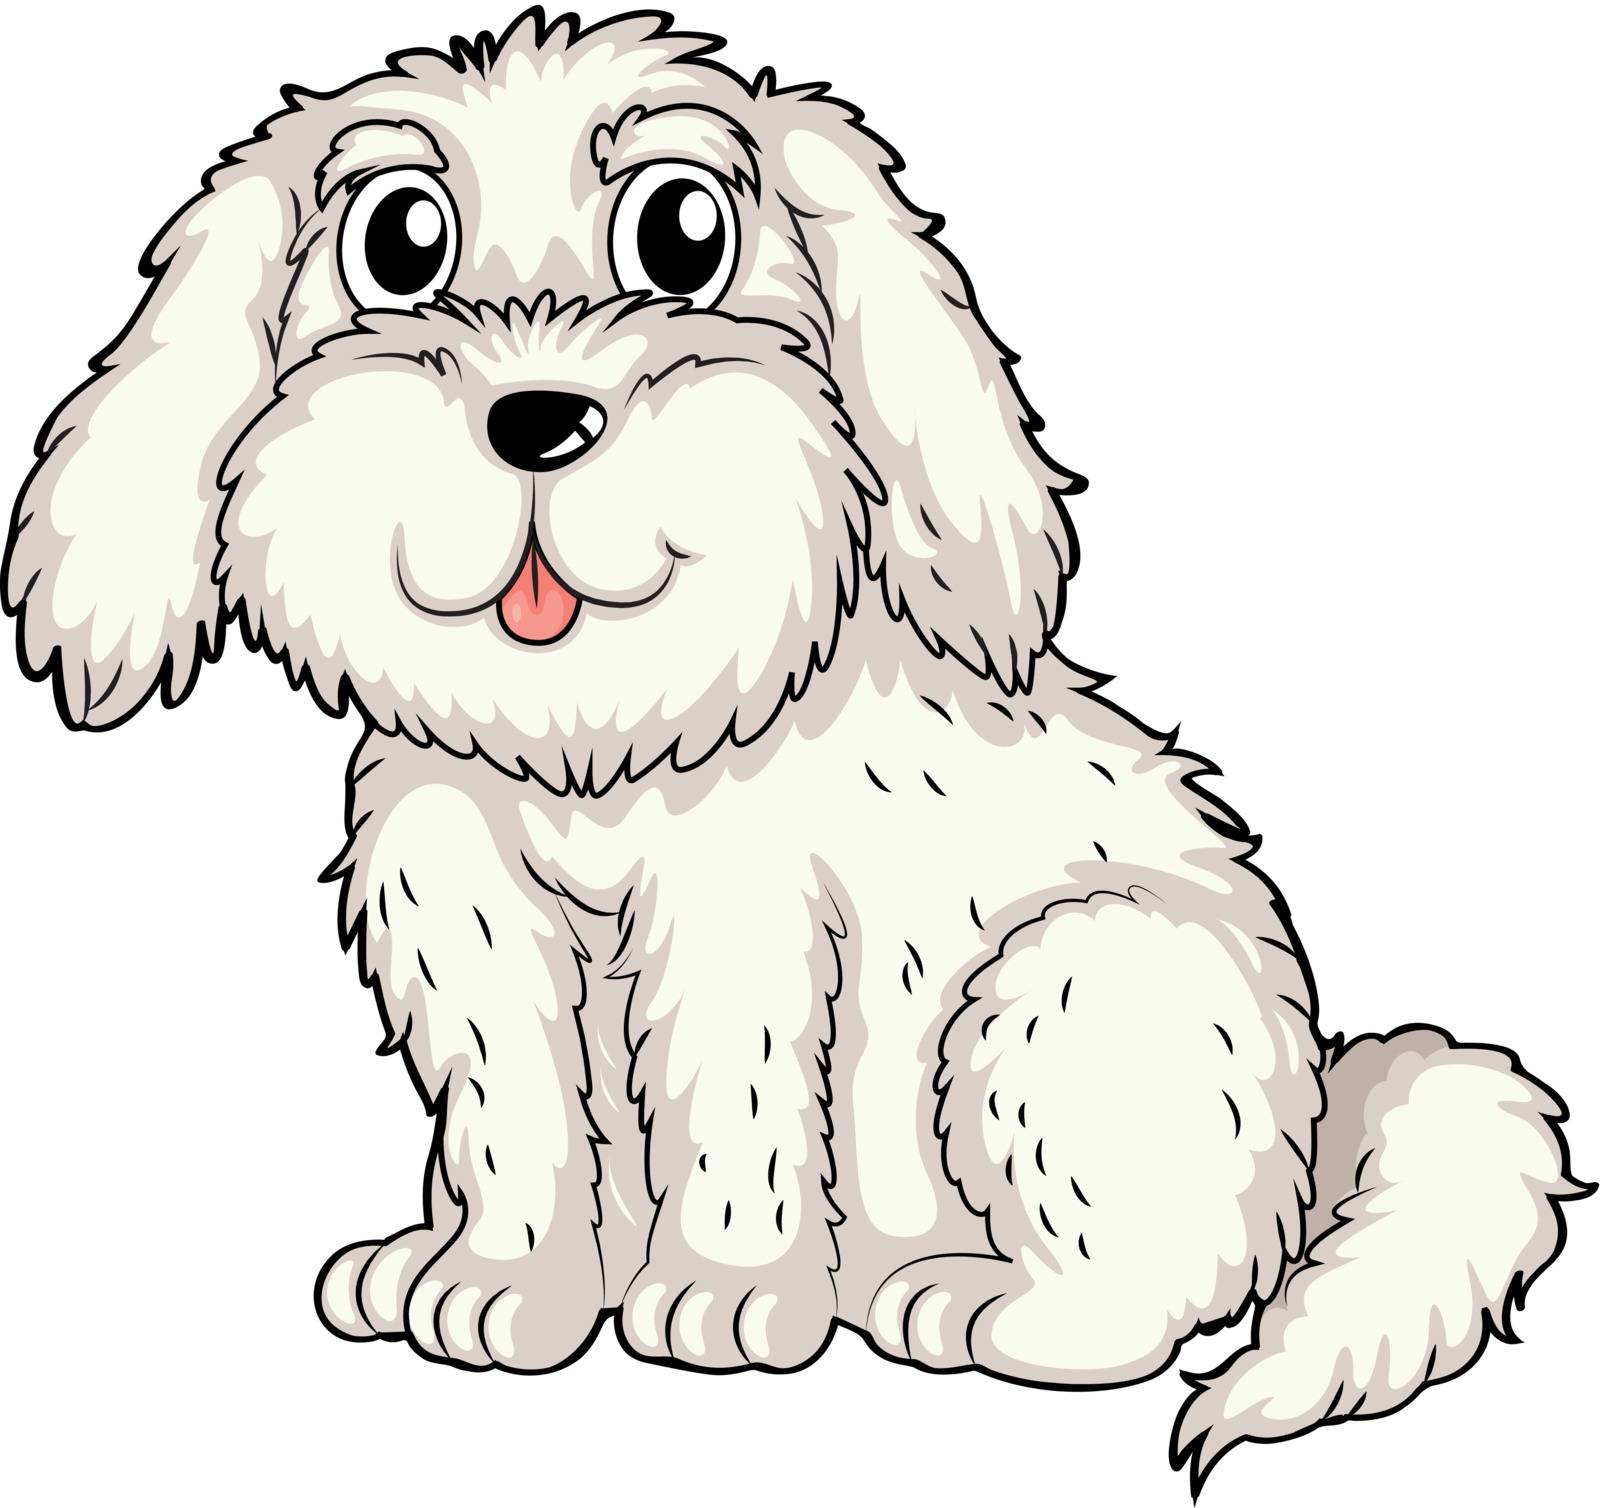 Illustration of a white puppy on a white background